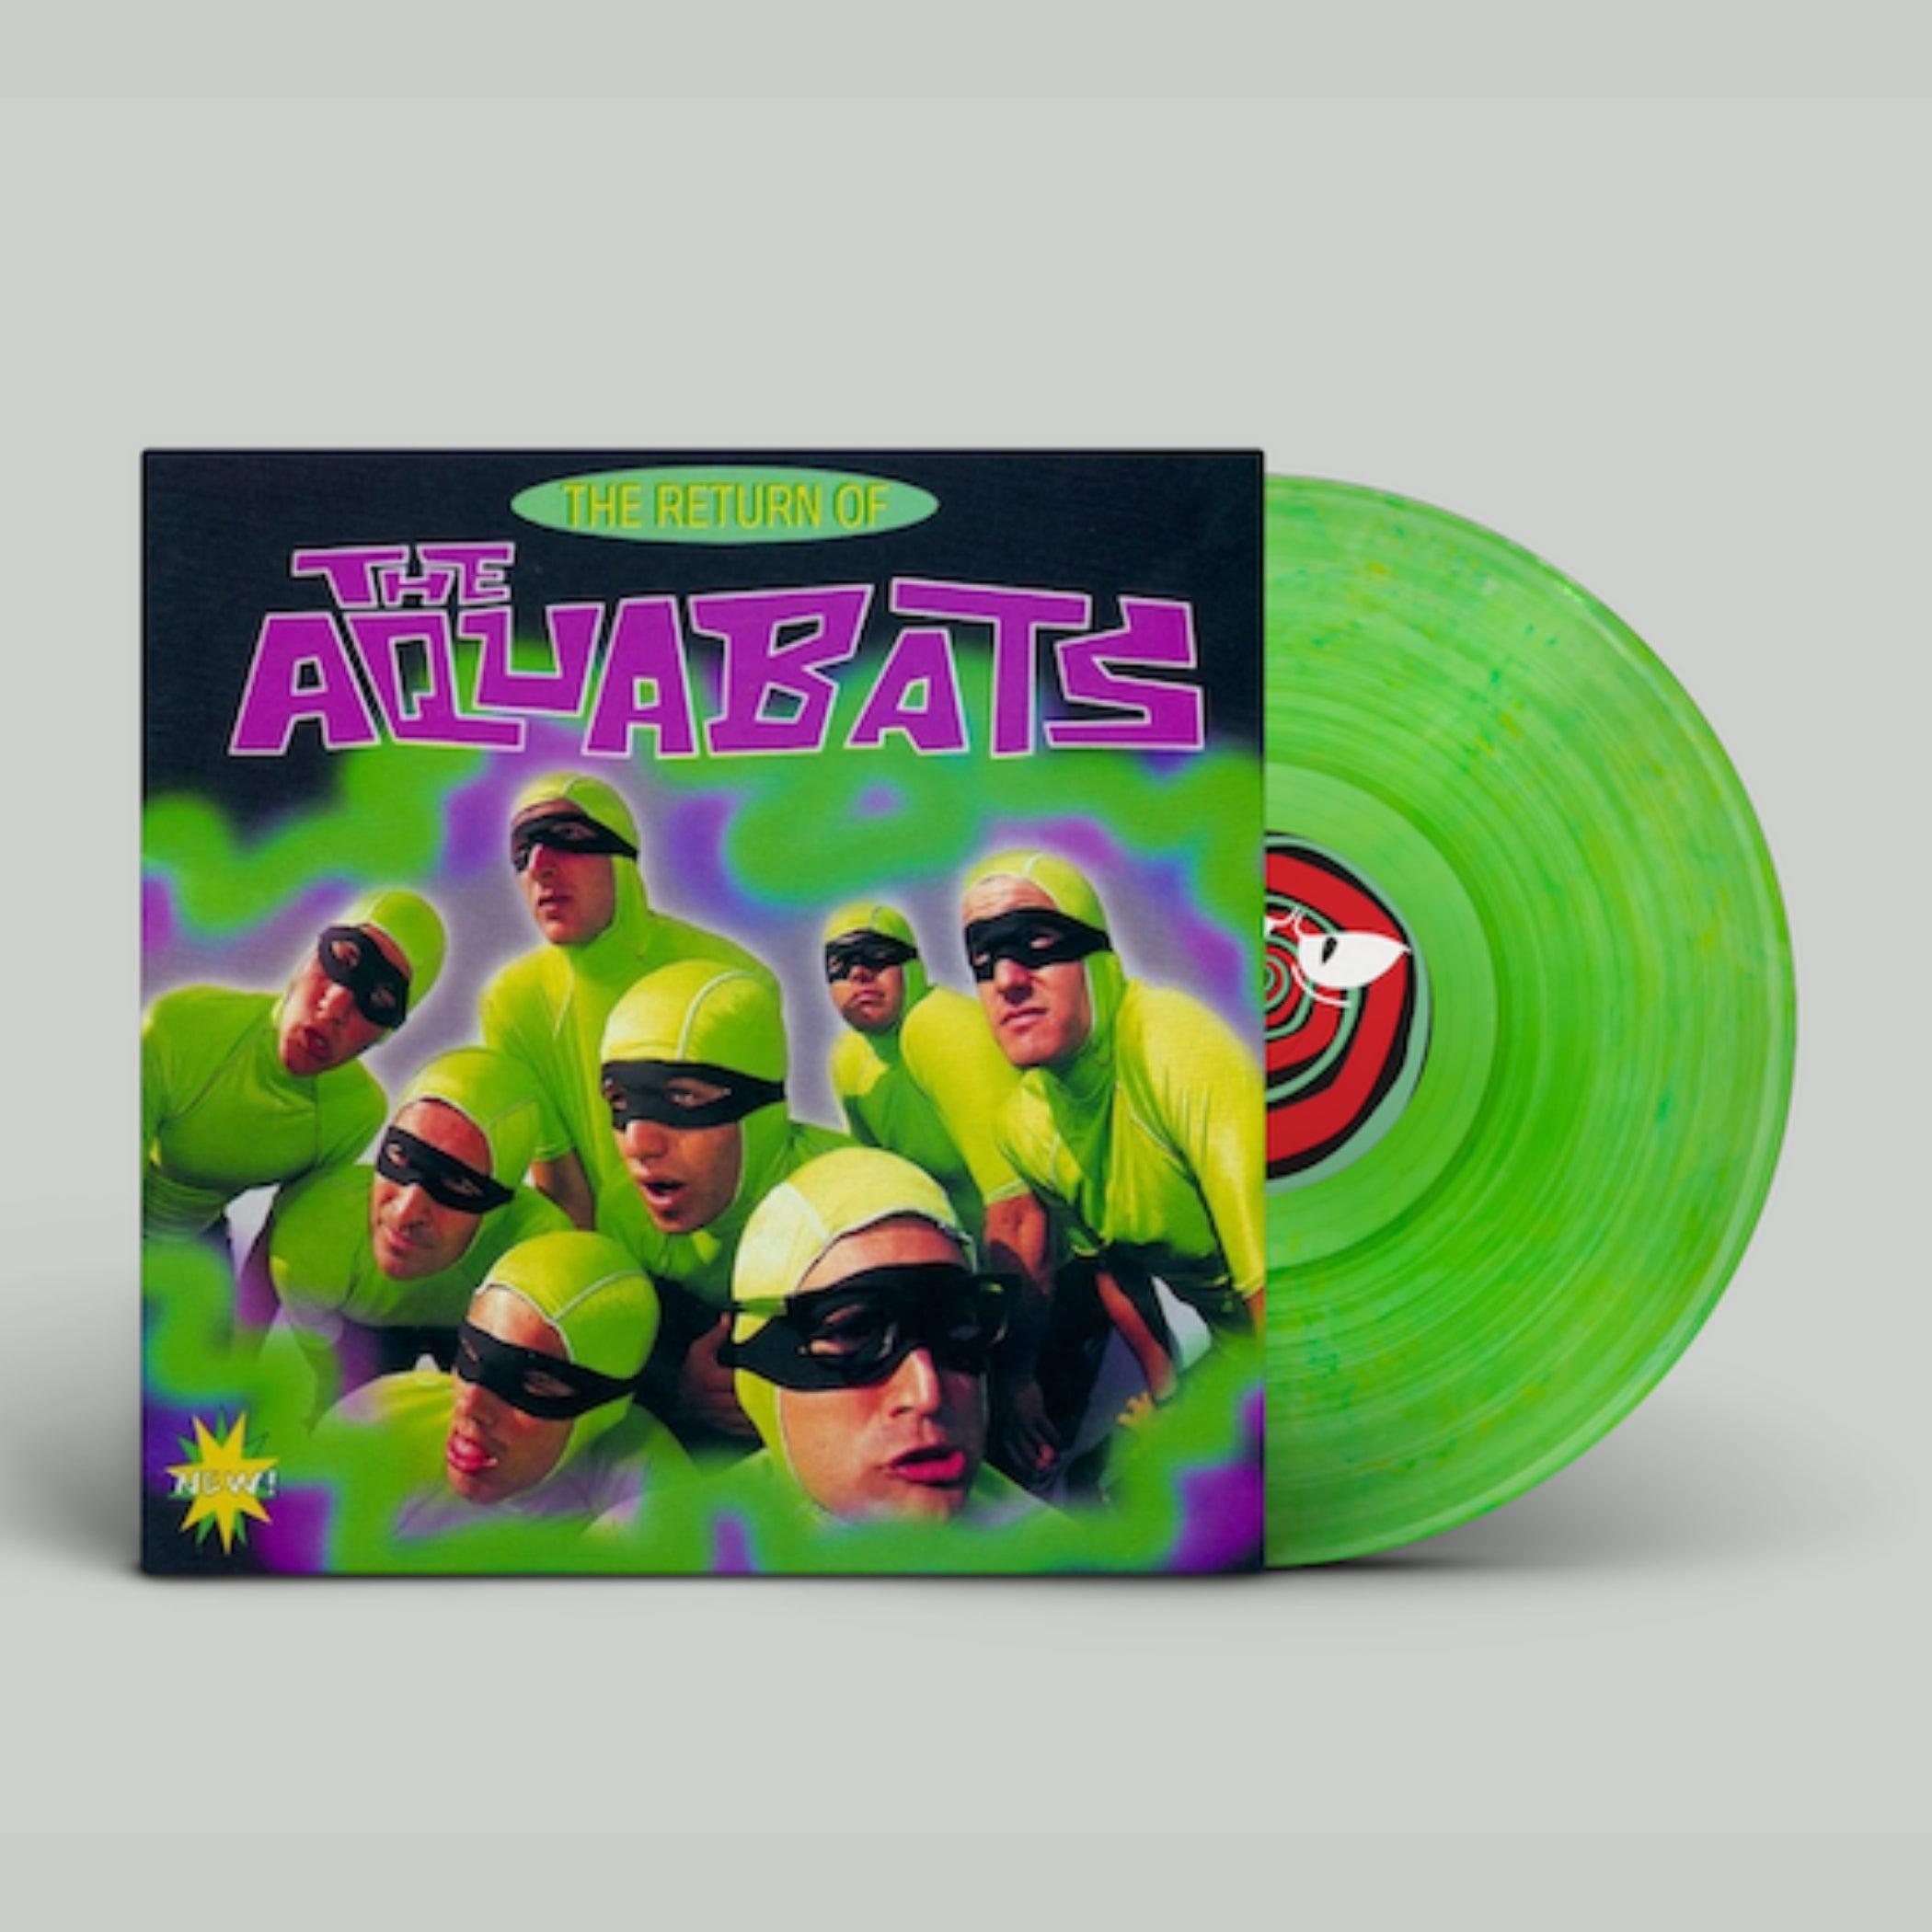 PRE-ORDER The Return of The Aquabats! gloopy-Exclusive "Martian Girl Green" LP